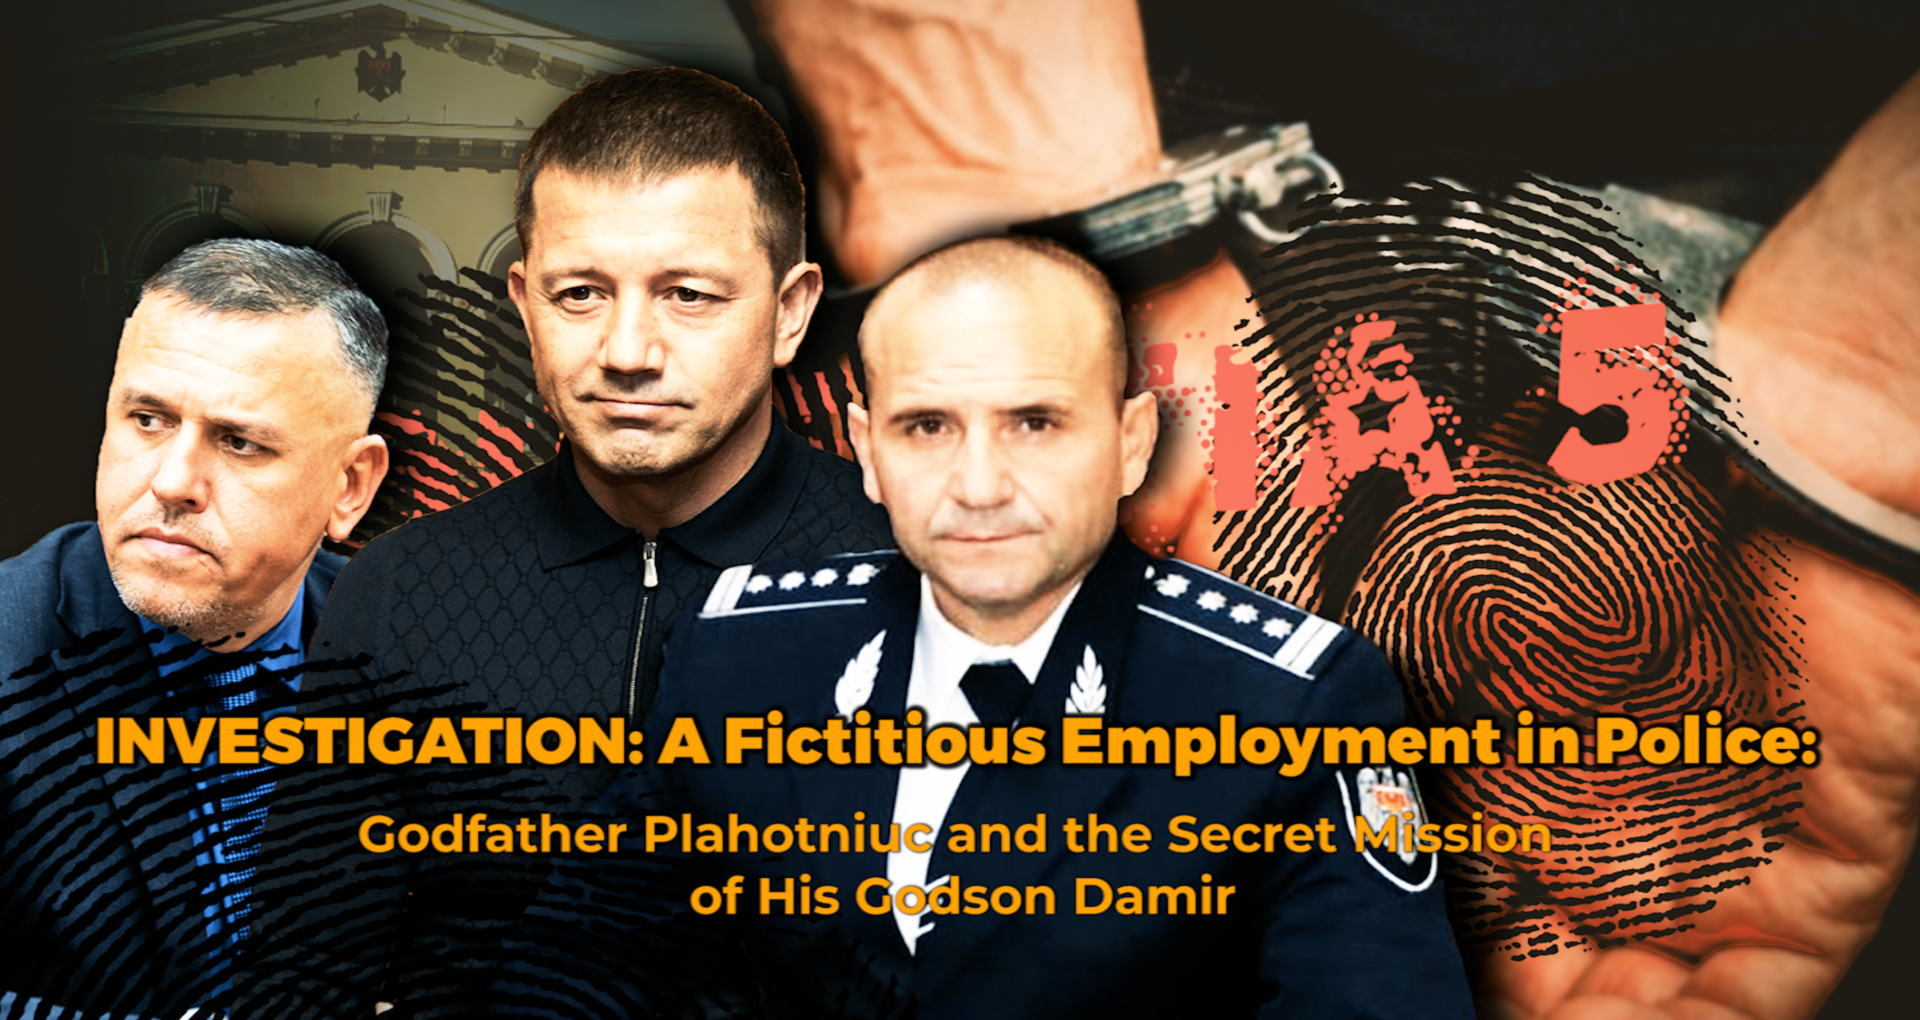 INVESTIGATION: A Fictitious Employment in Police: Godfather Plahotniuc and the Secret Mission of His Godson Damir